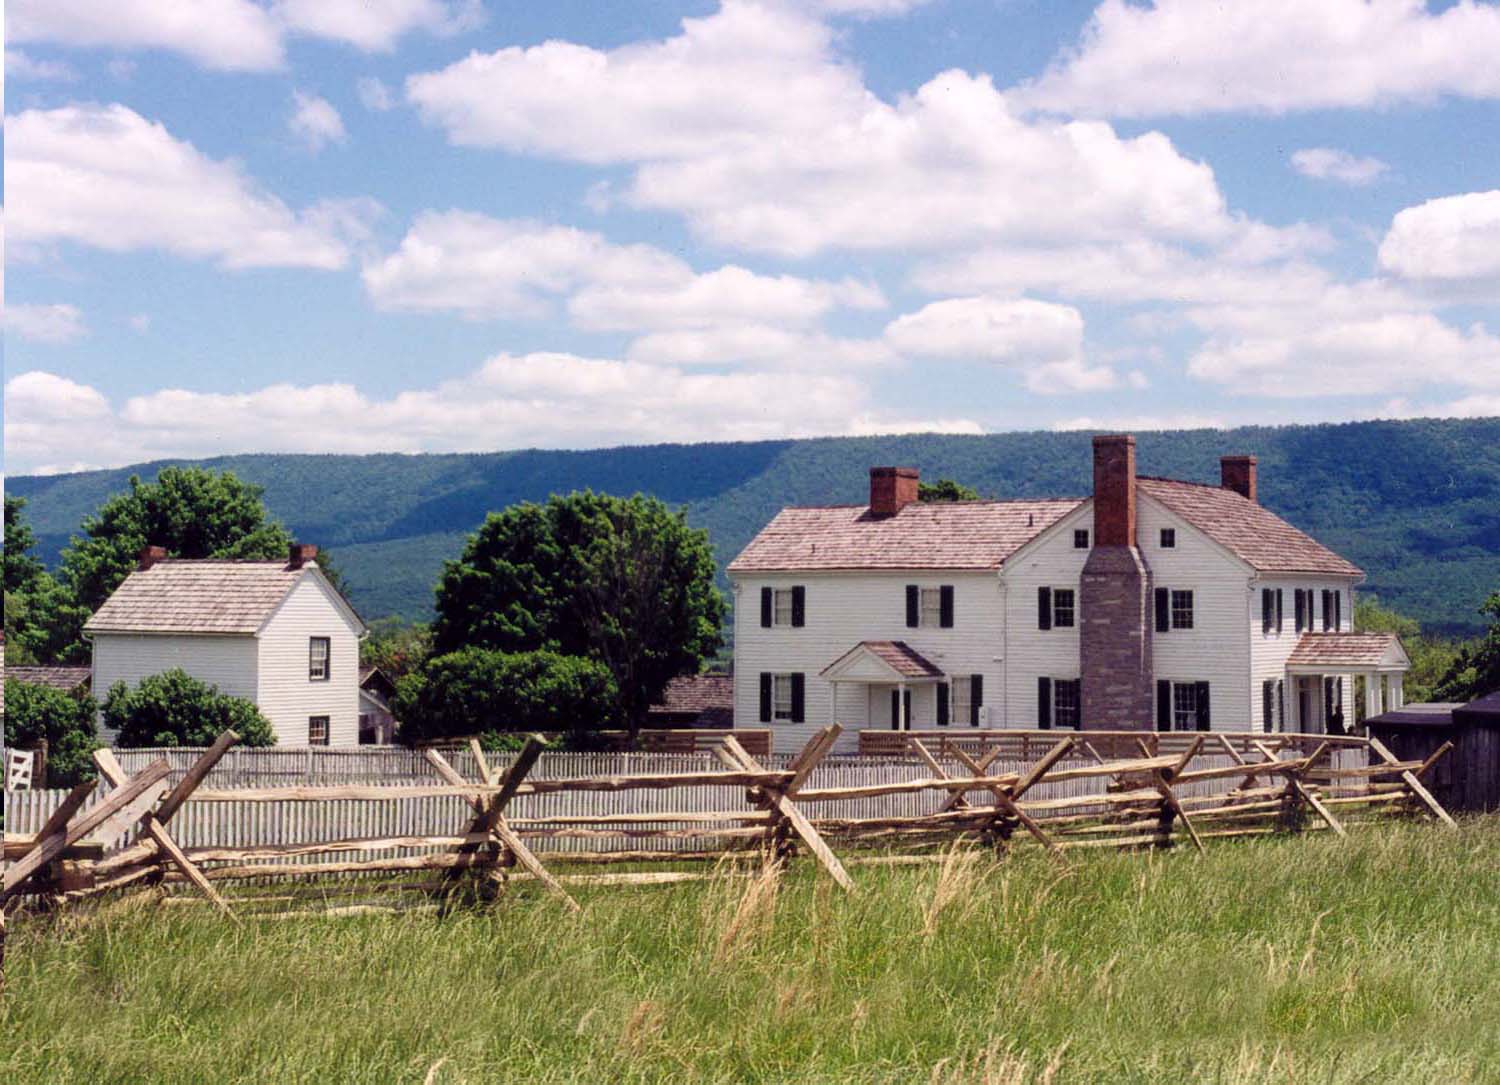 Photo of Bushong Farmhouse with rail fence in foreground